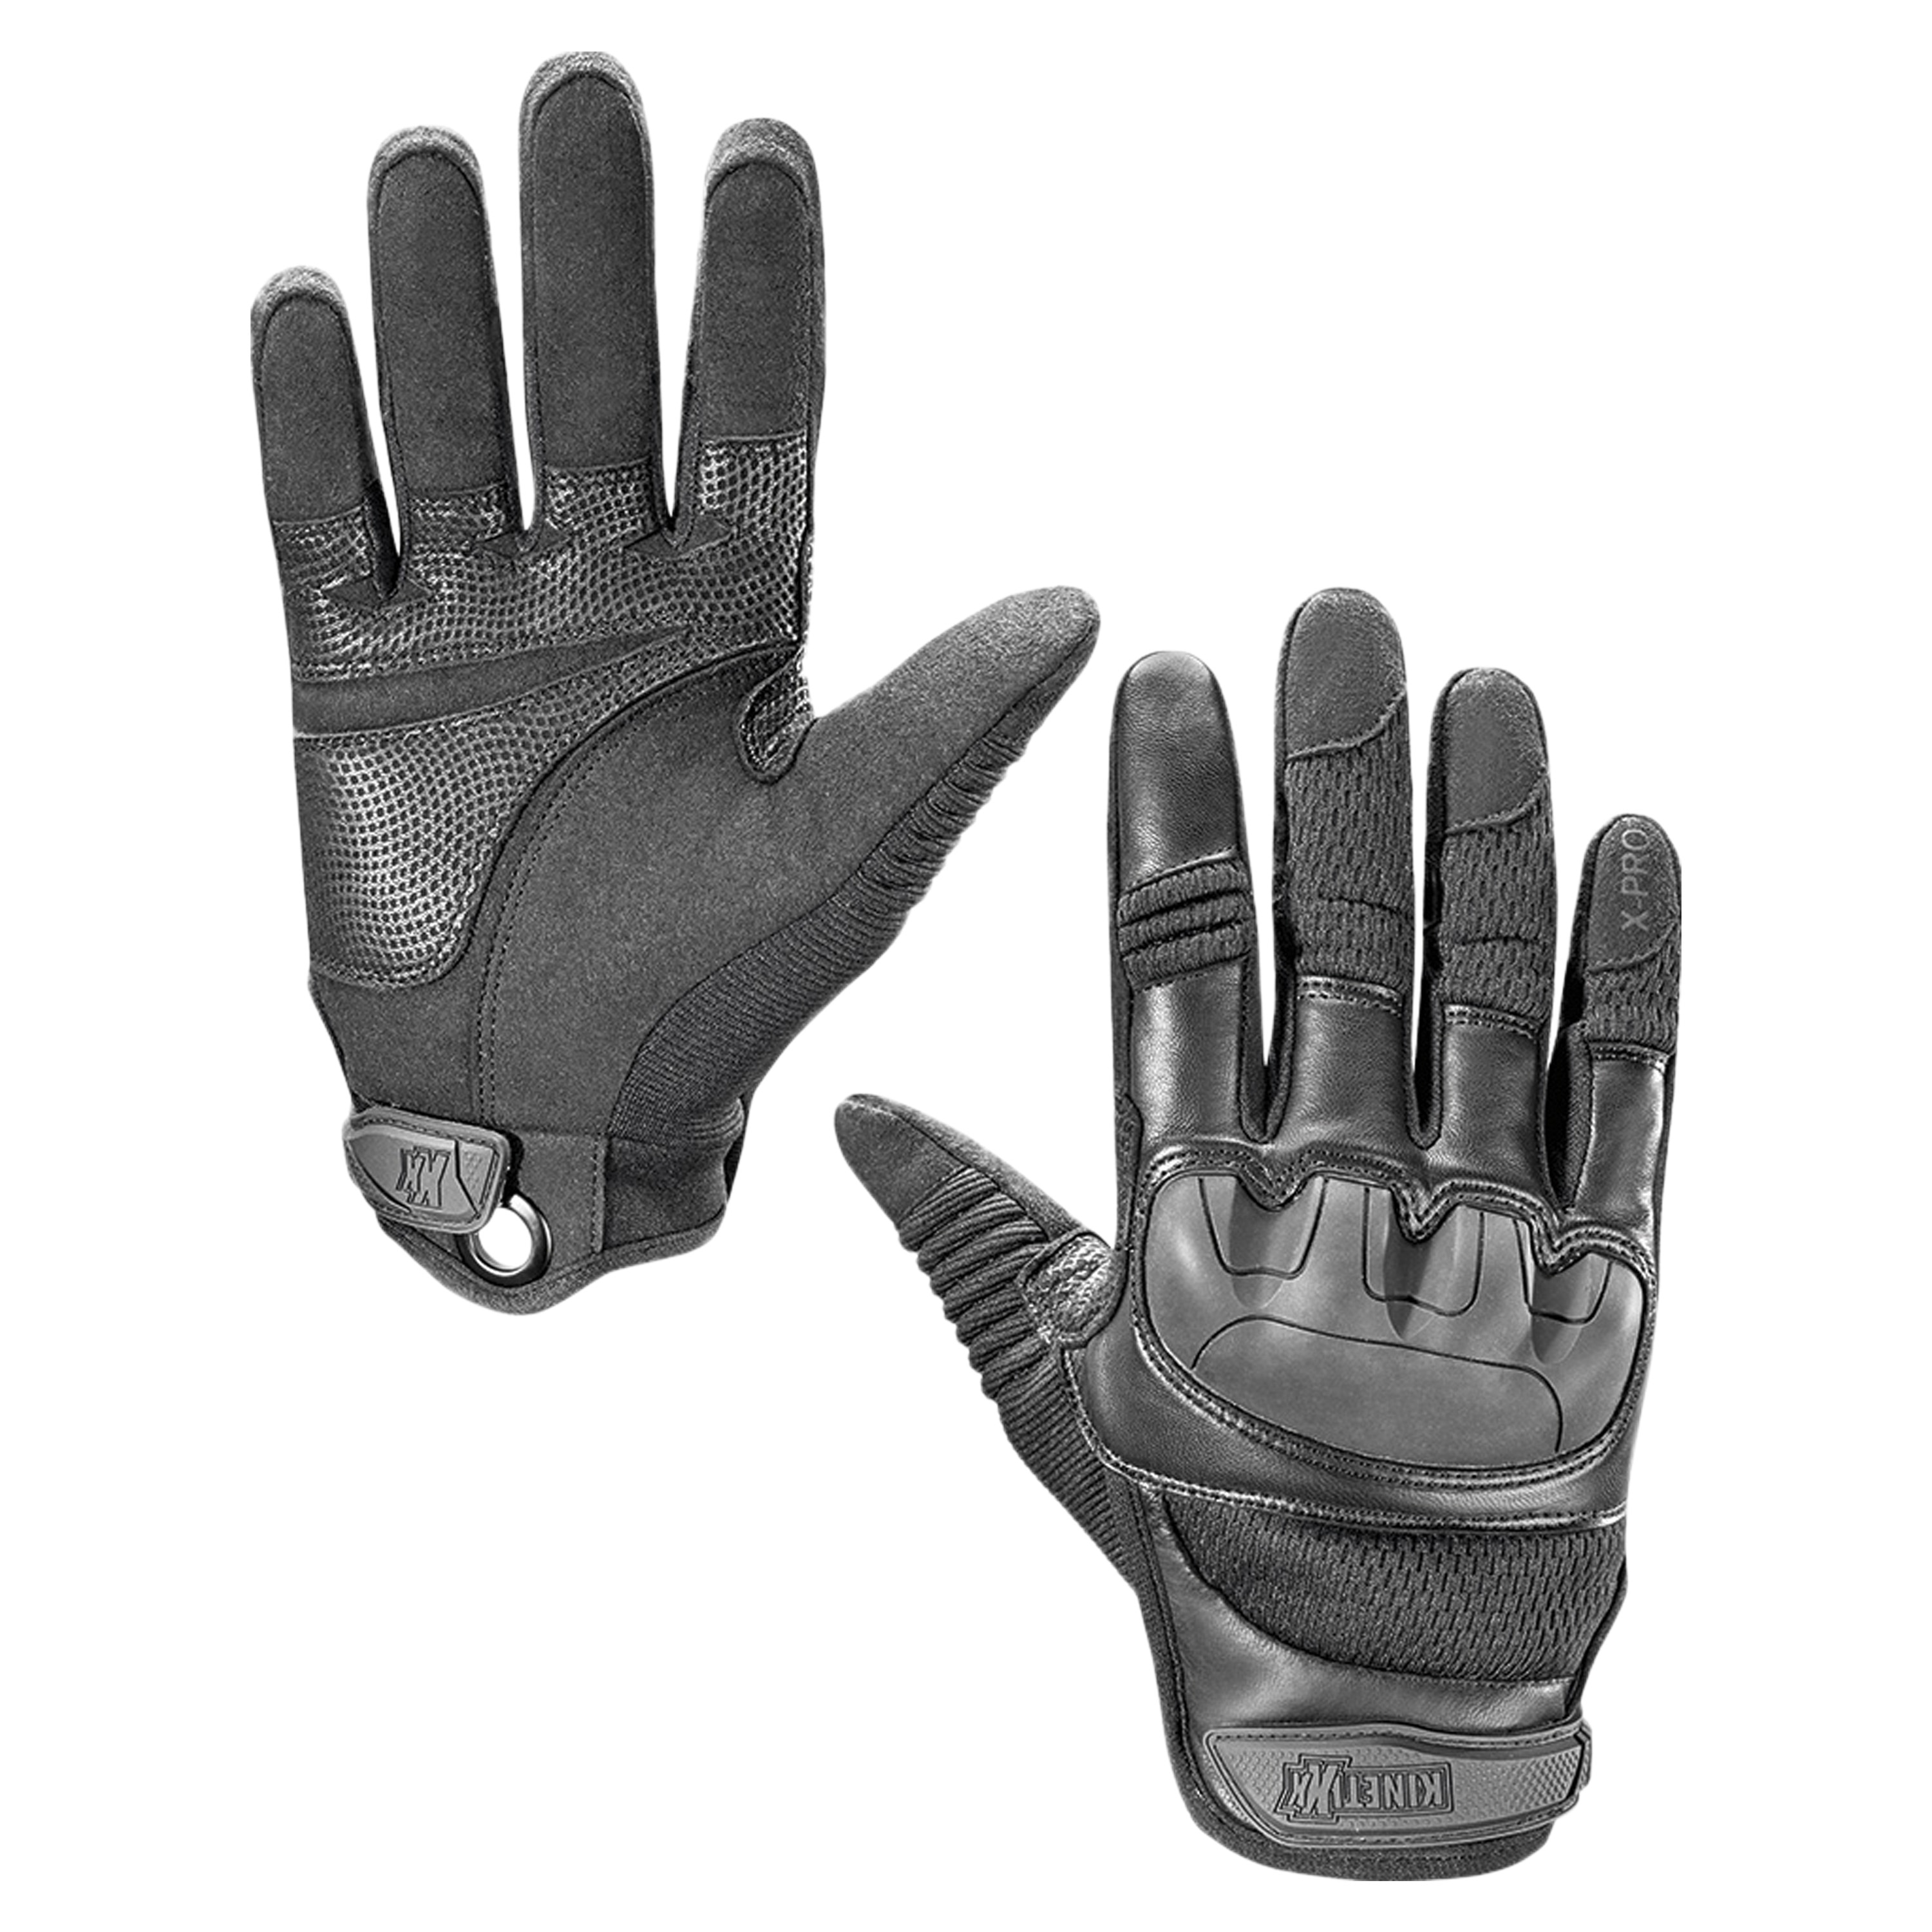 Military Tactical Operations Gloves KinetiXx X-Trem Police